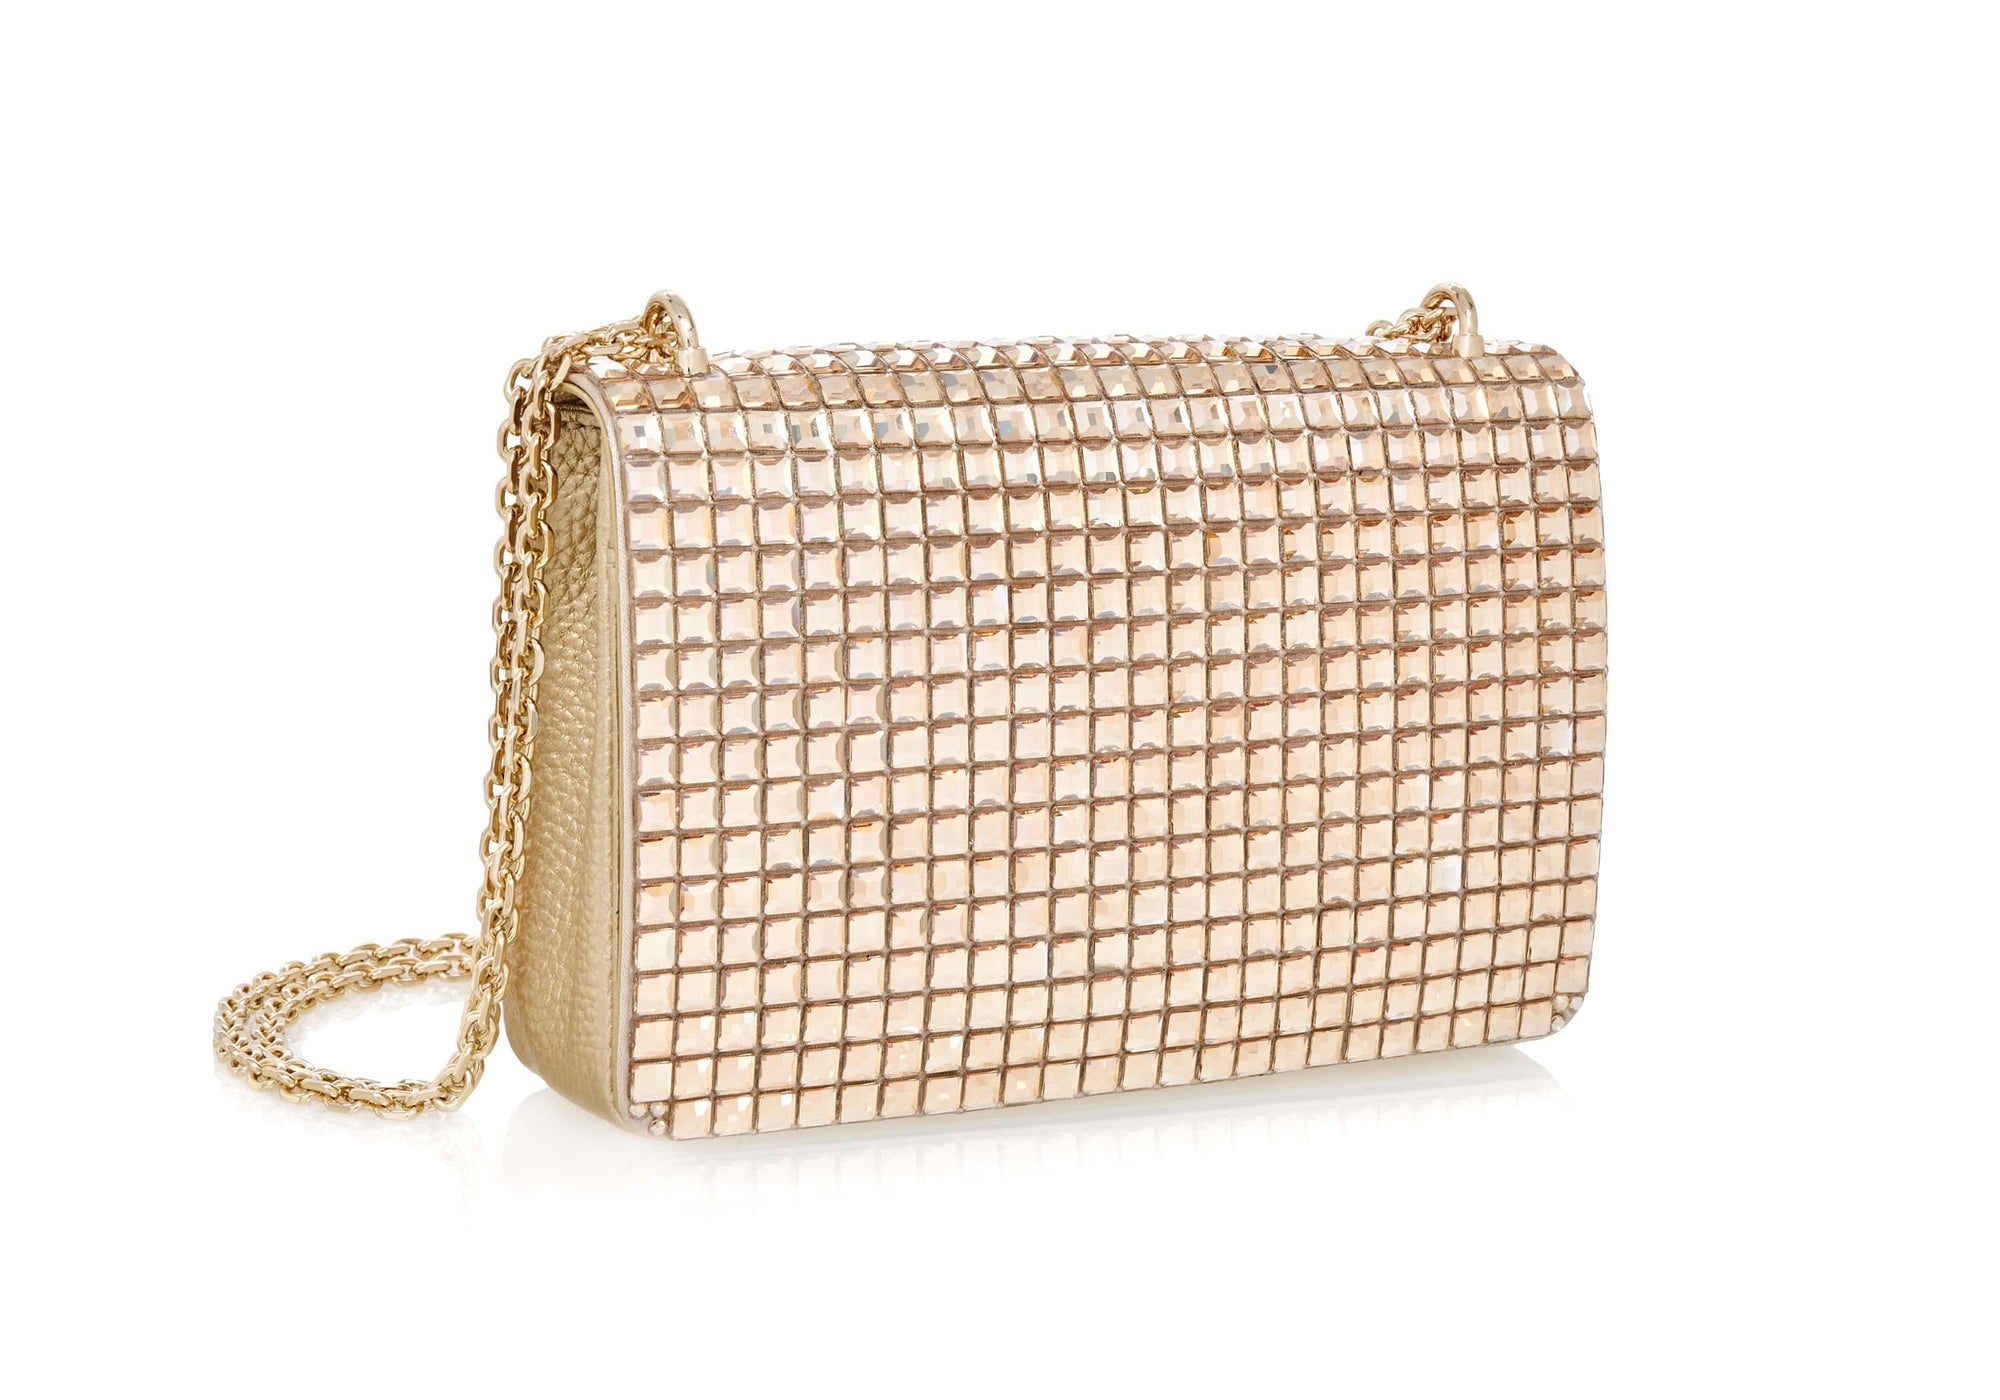 Summer Is Coming: These 7 Summery Judith Leiber Bags Will Steal the Su